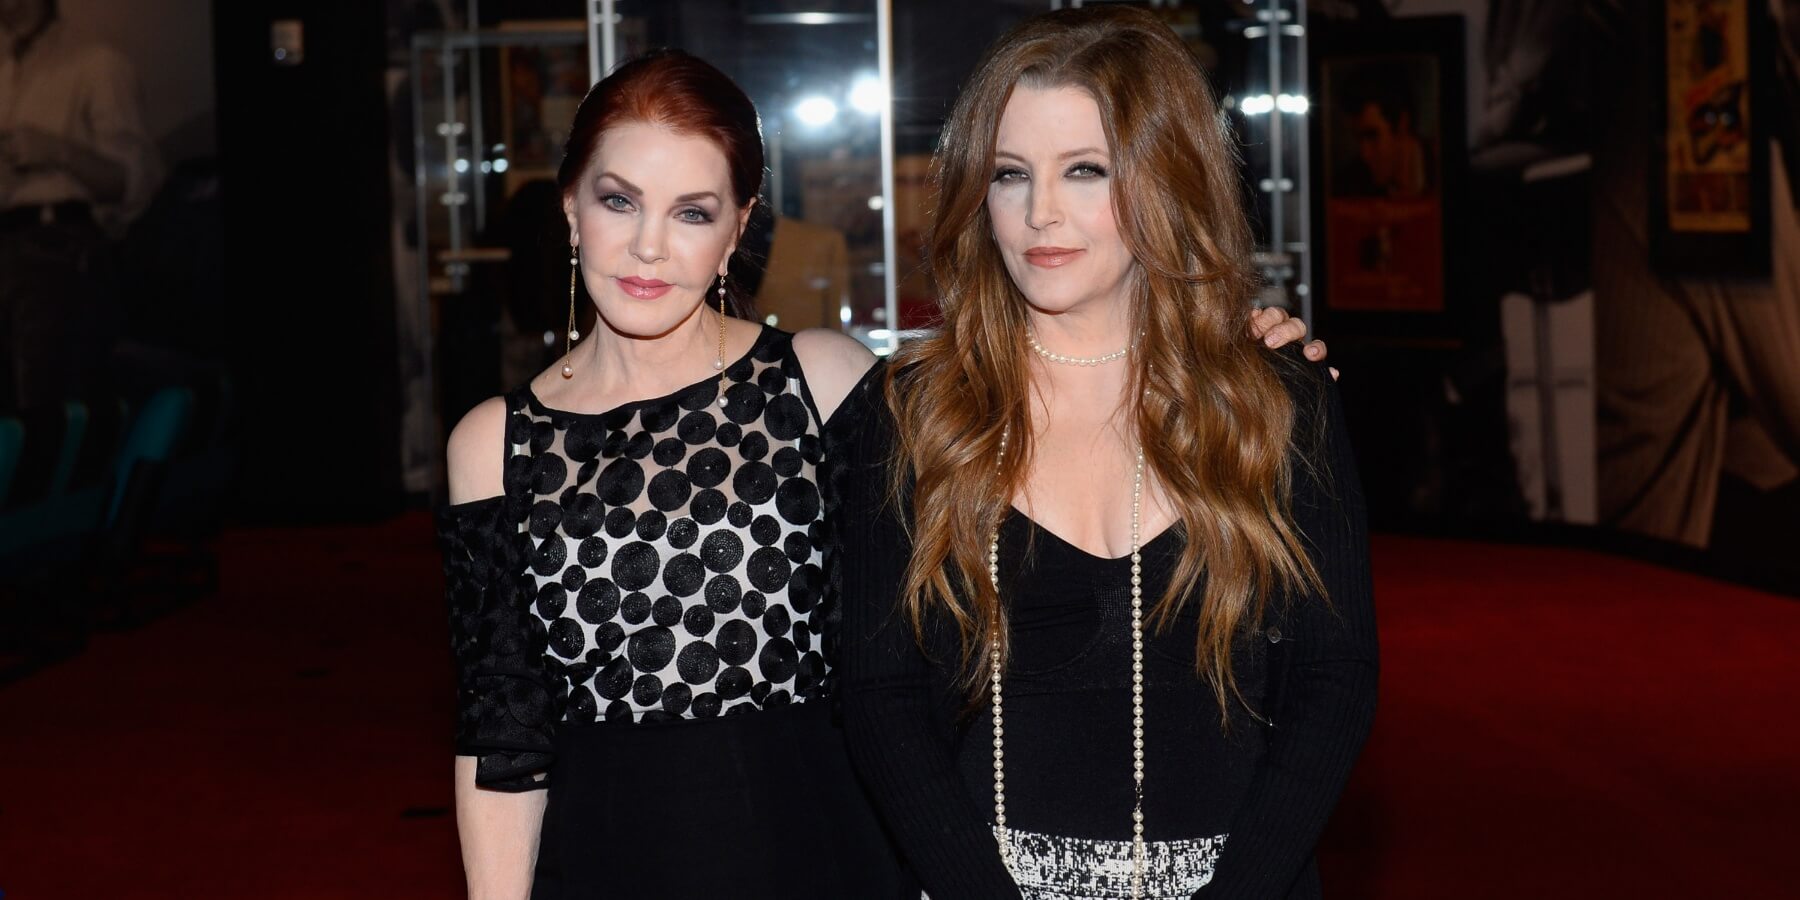 Priscilla Presley and Lisa Marie Presley pose together in 2015.